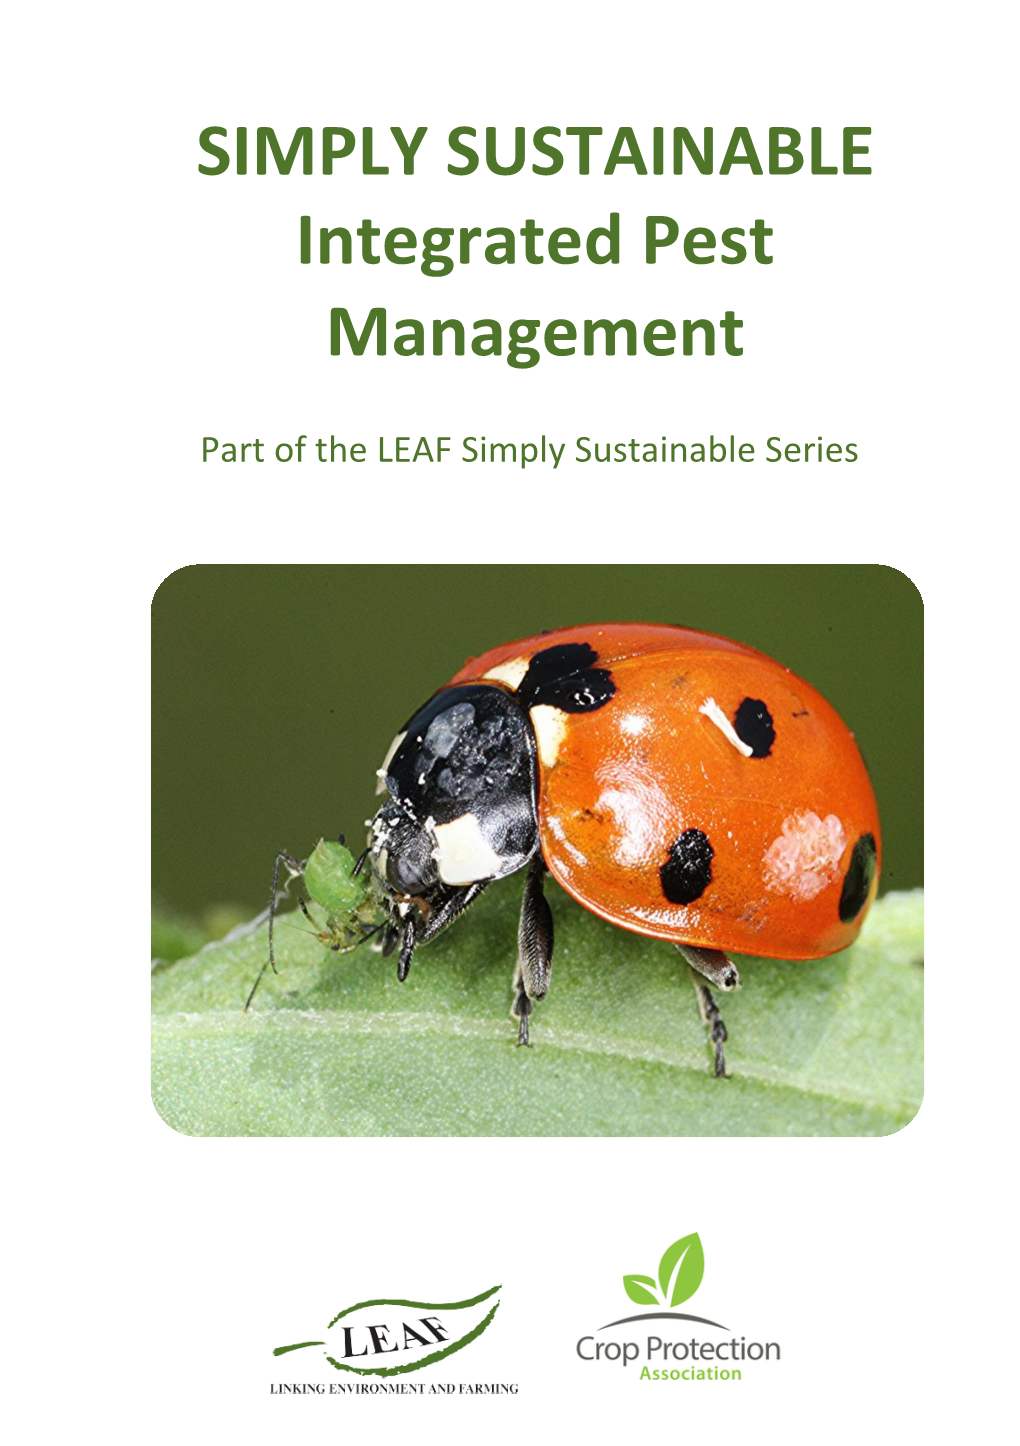 SIMPLY SUSTAINABLE Integrated Pest Management